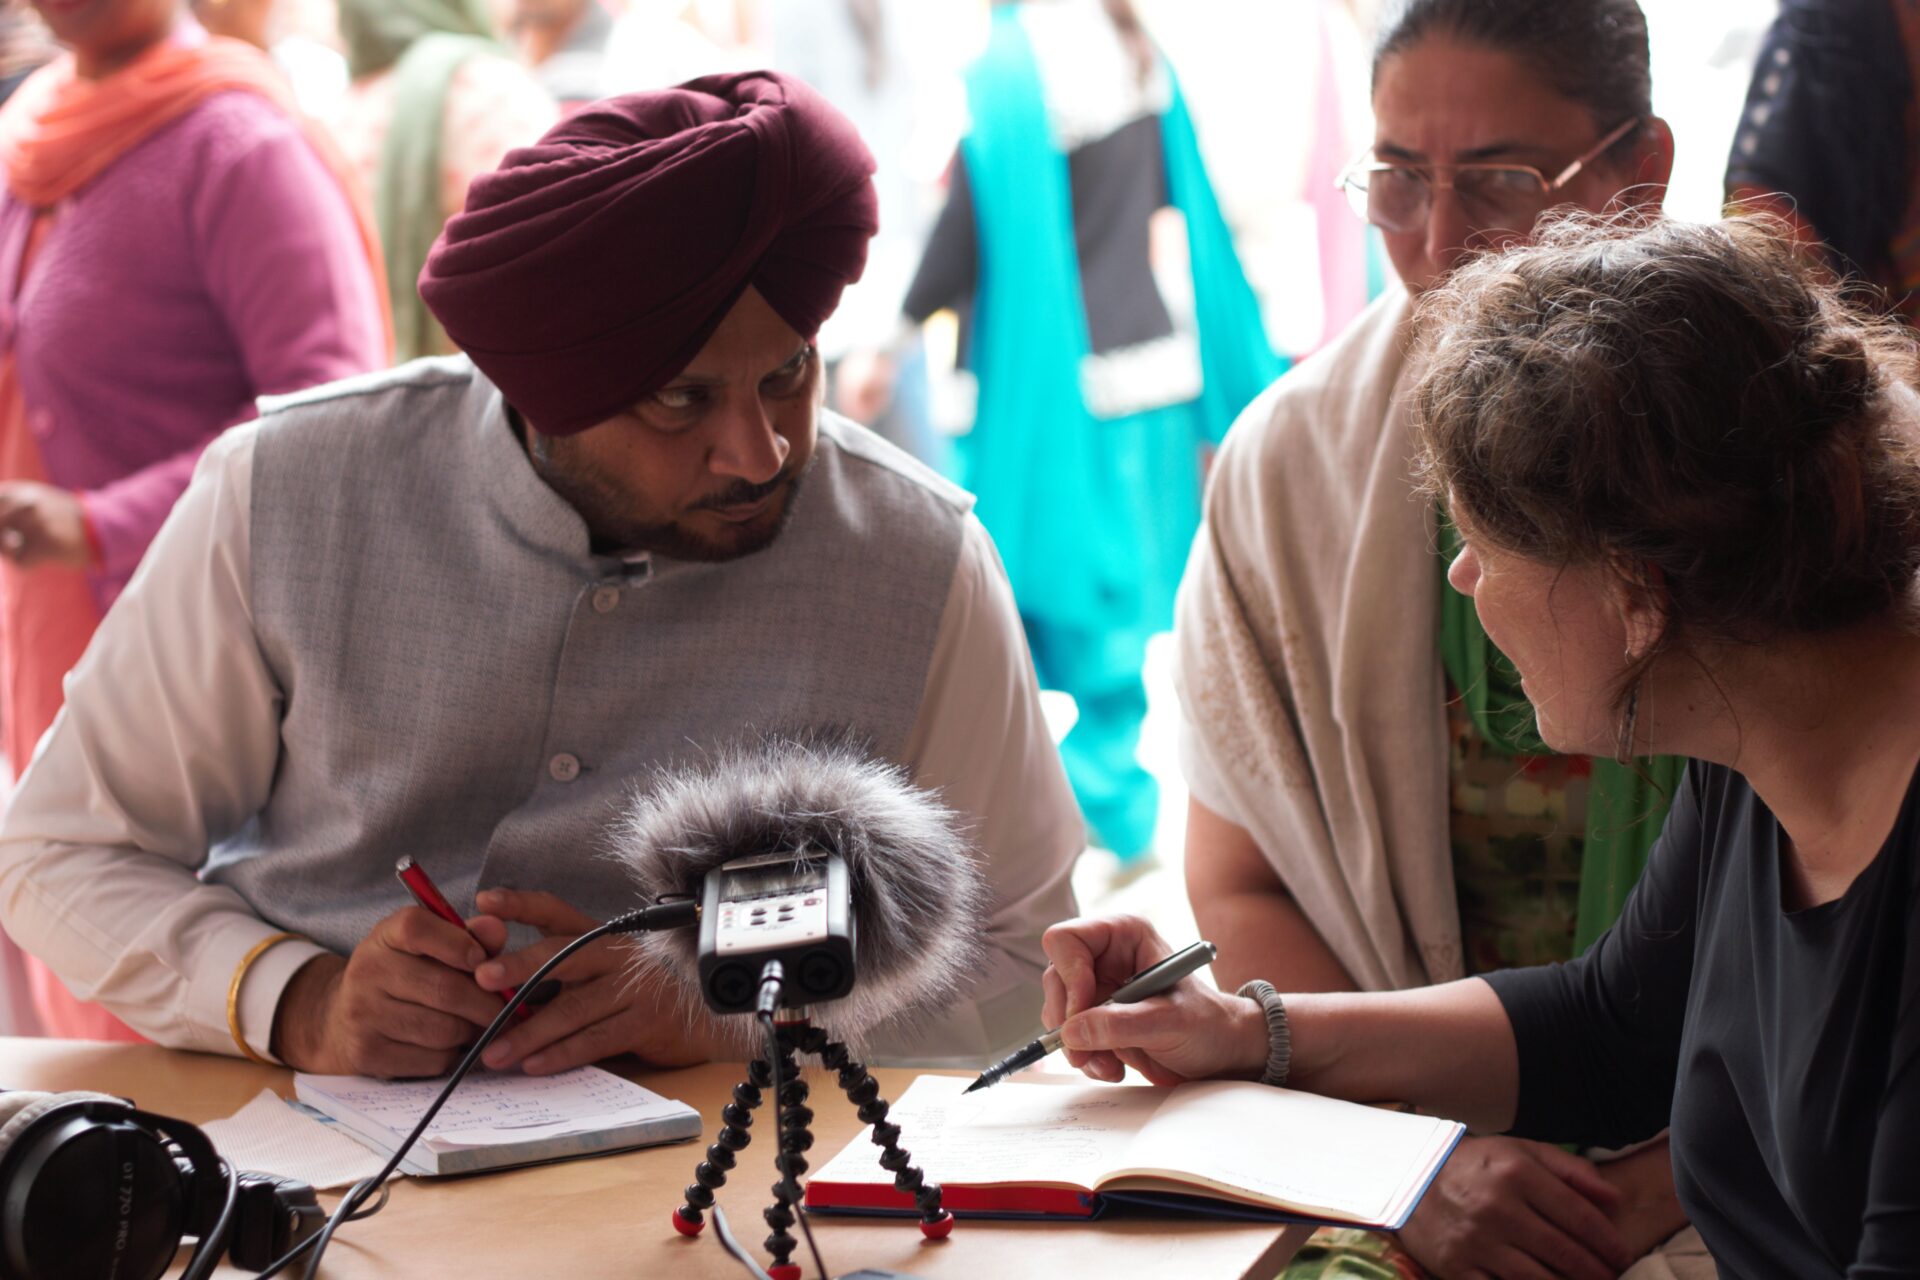 Sikh man and woman being interviewed